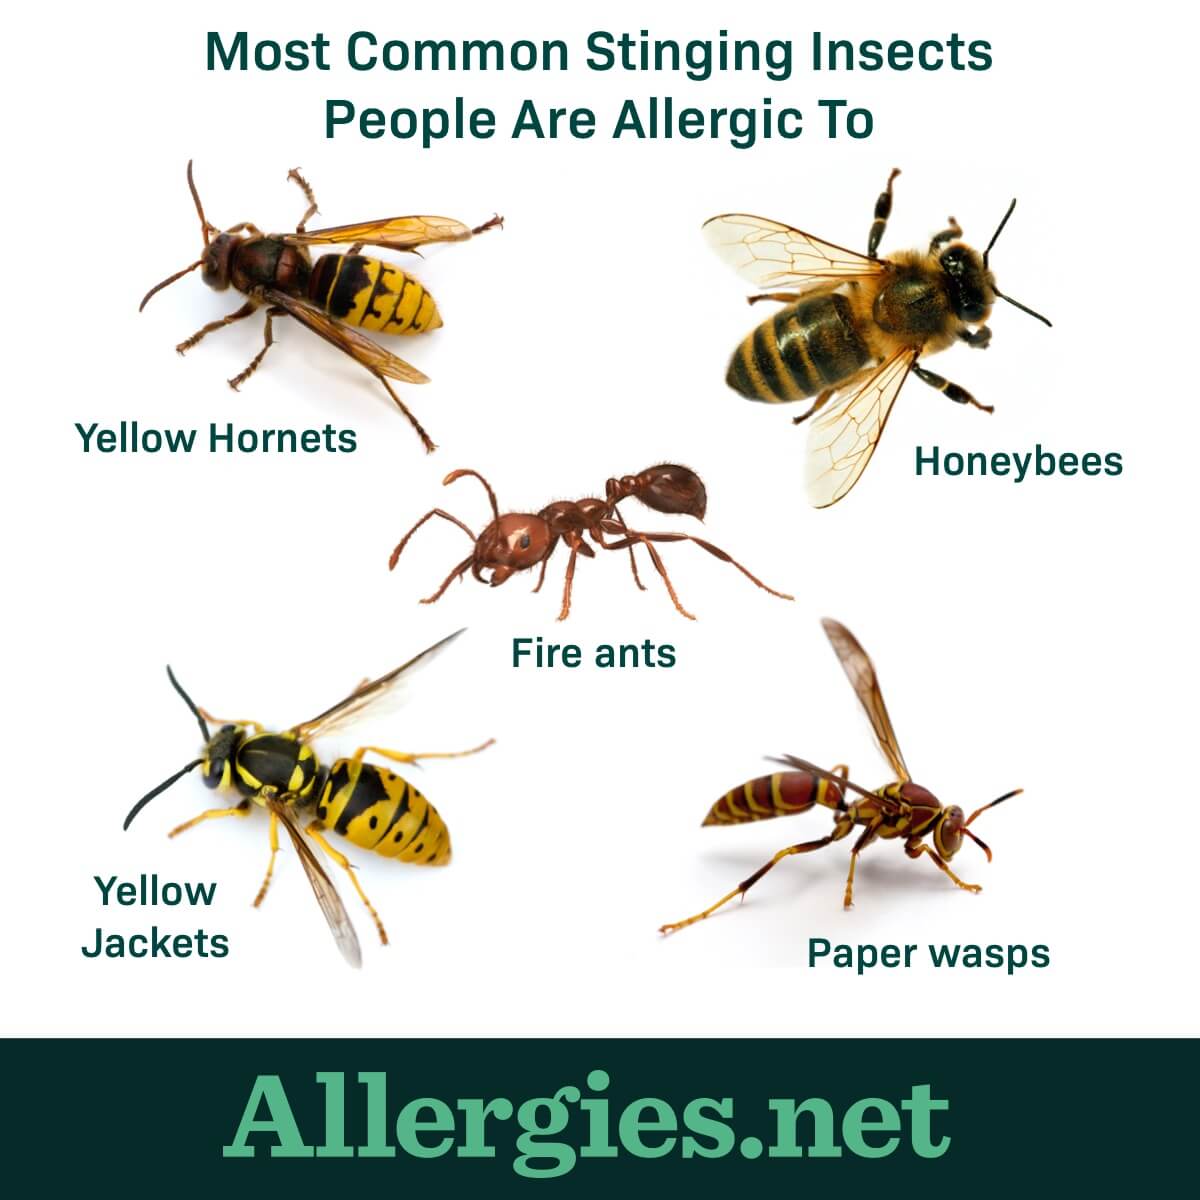 The 5 insects that cause the most allergic reactions are honeybees, paper wasps, yellow jackets, yellow hornets, and fire ants.